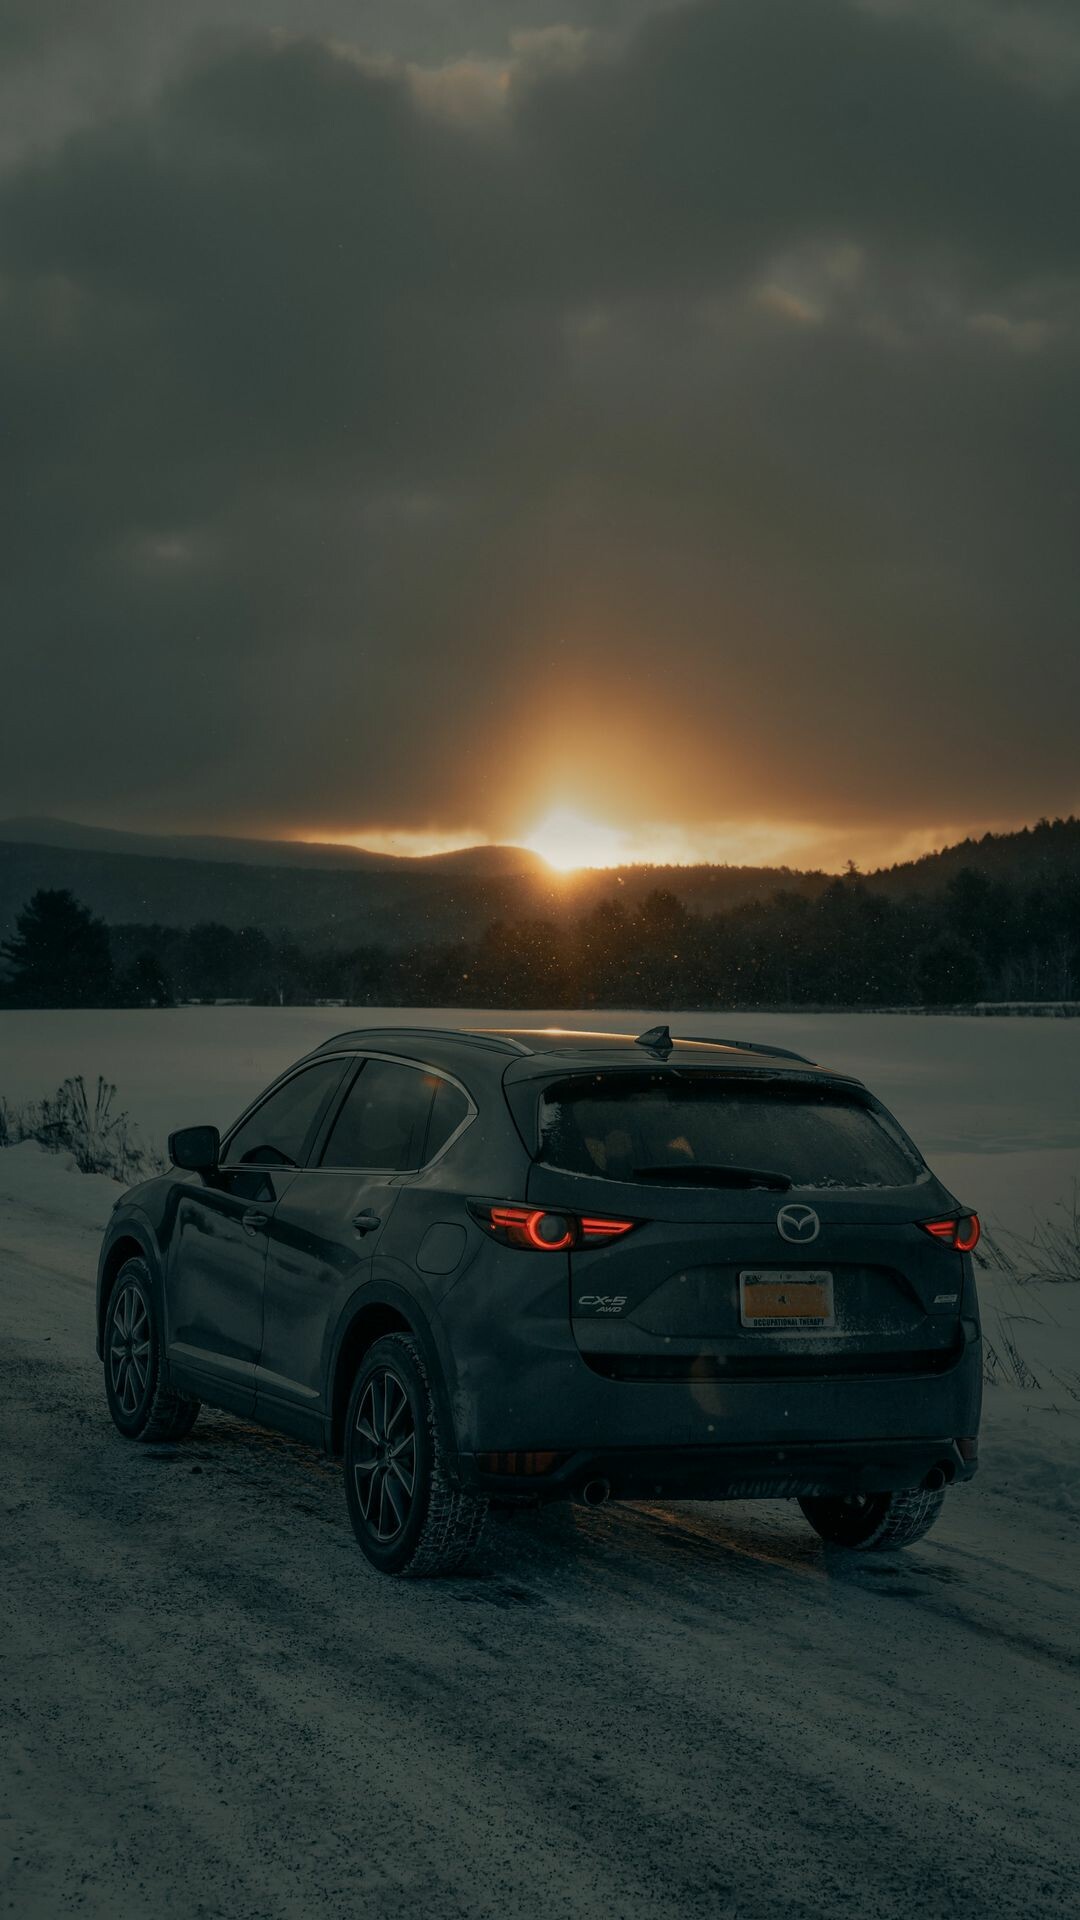 Mazda CX-5, Free mobile wallpapers, Best download, 1080x1920 Full HD Phone